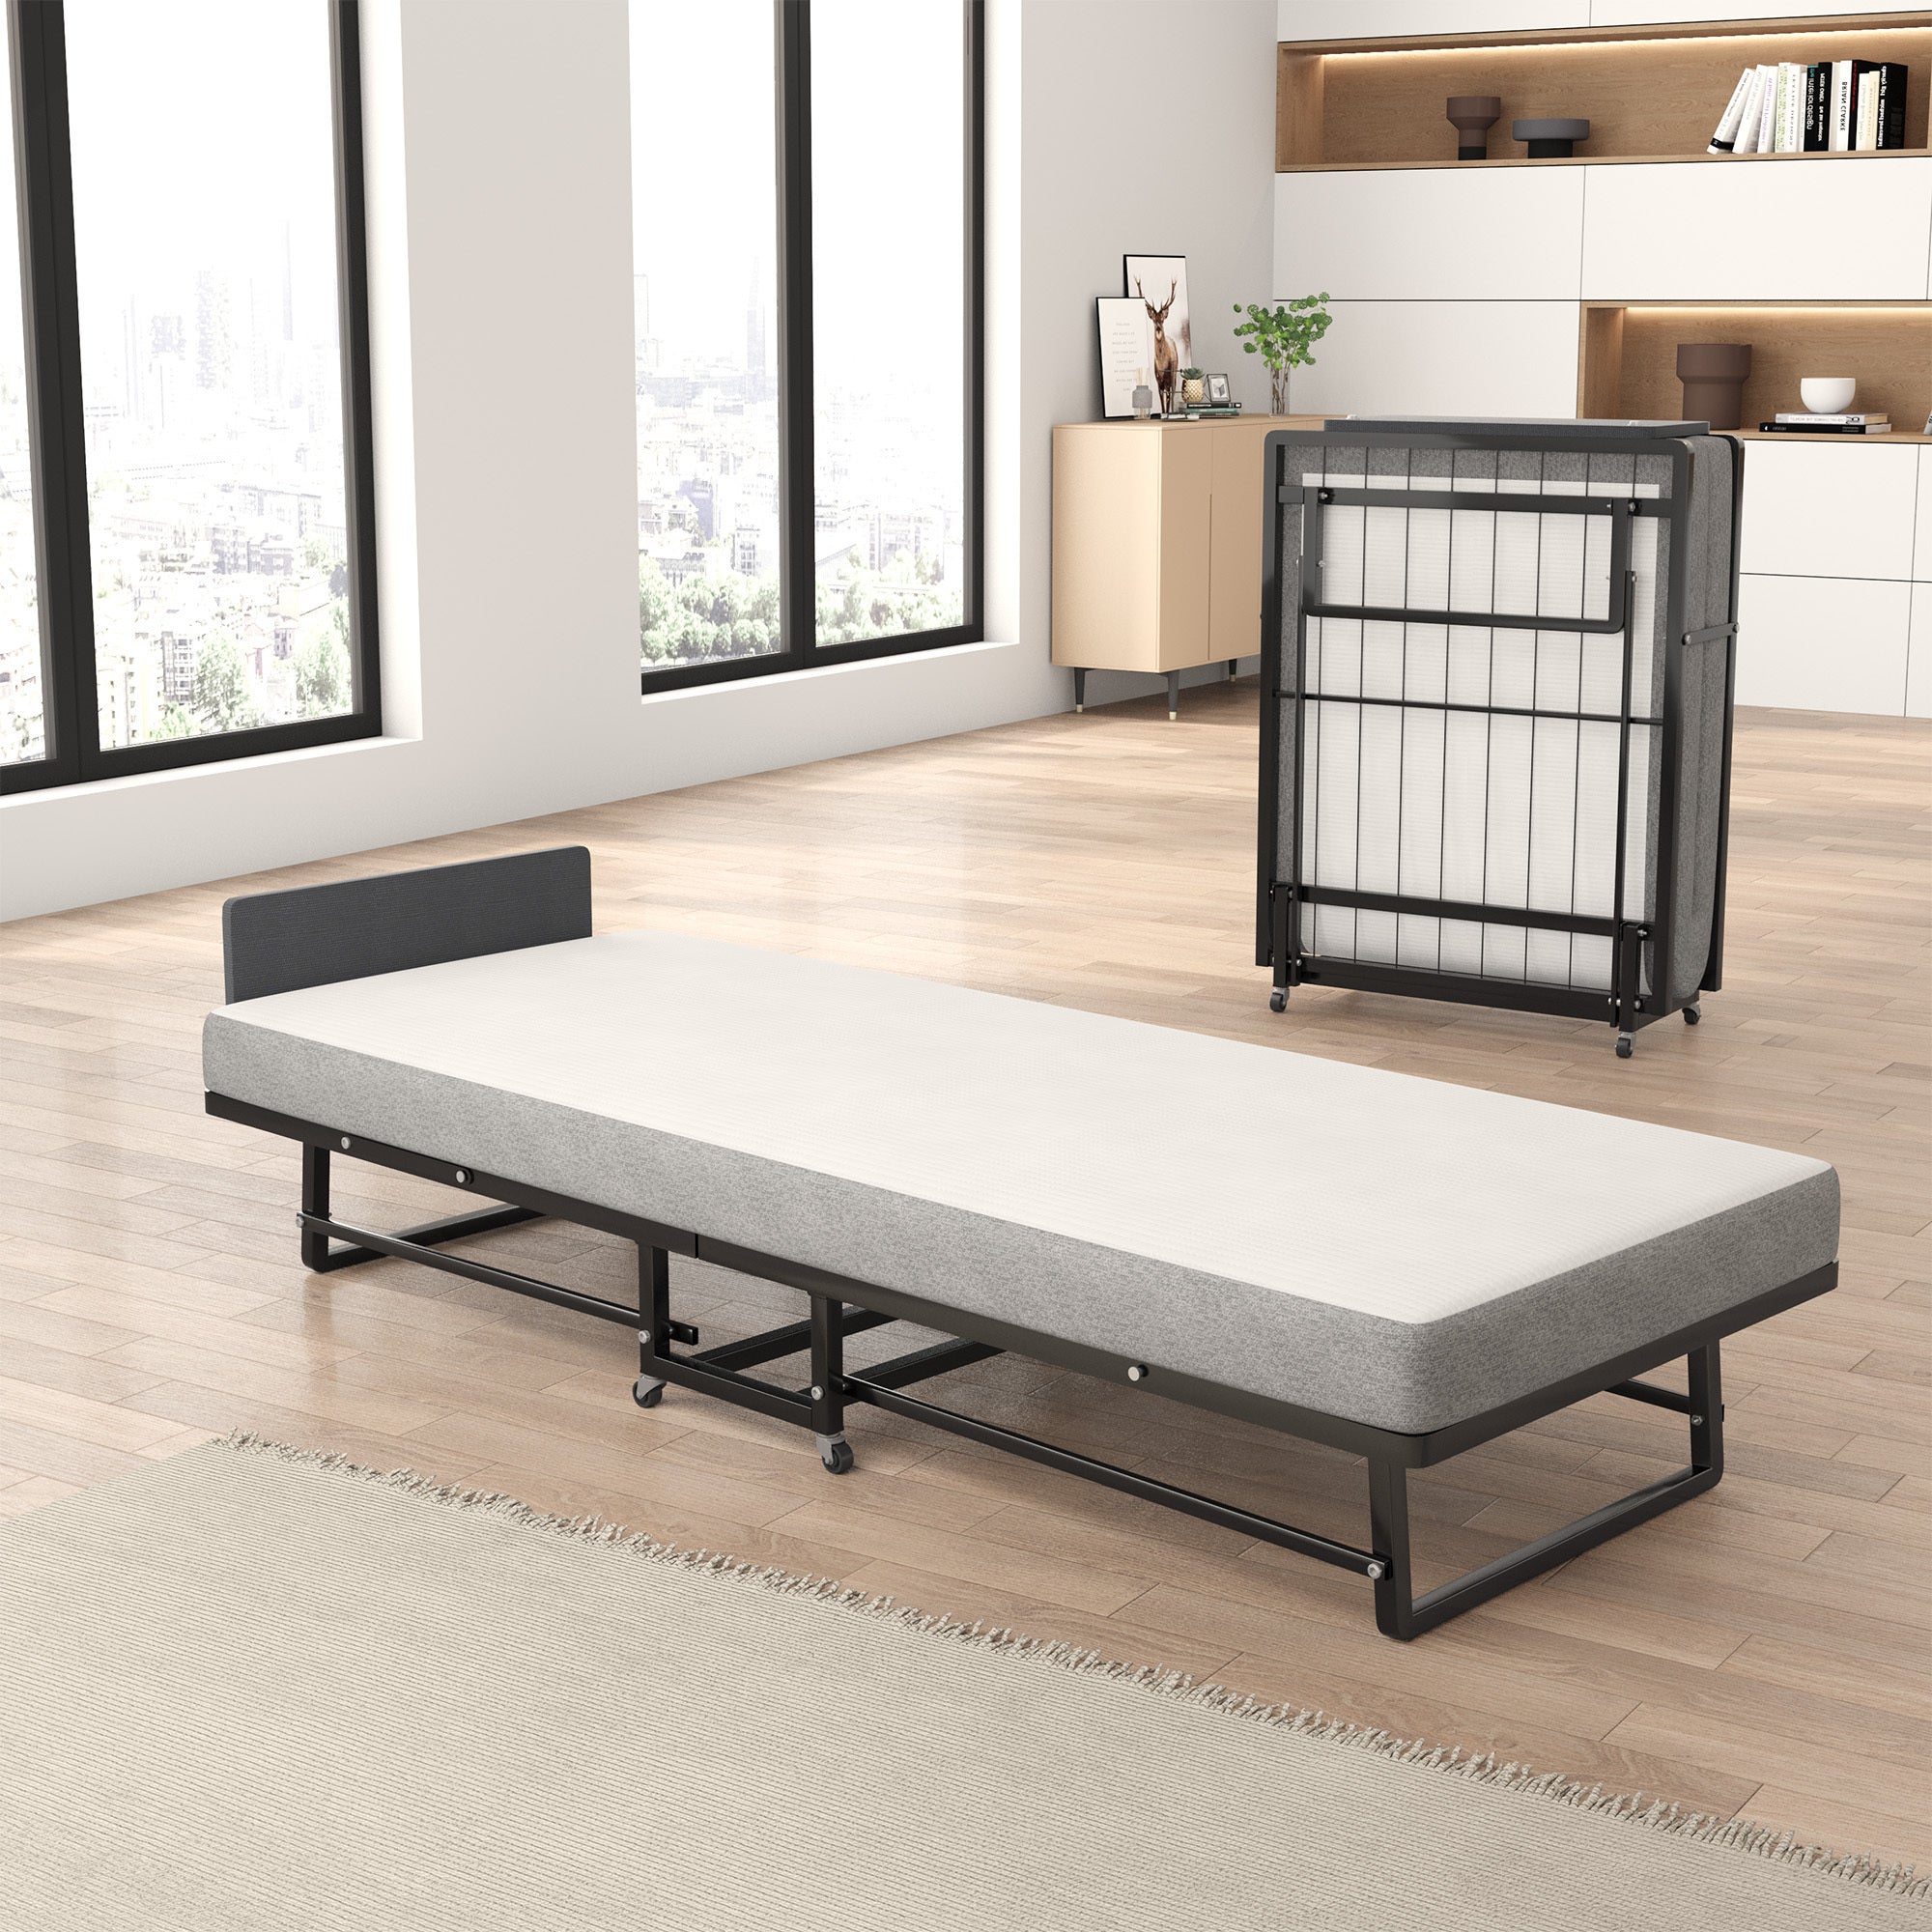 🆓🚛 Metal Folding Bed Frame With Foam Mattress of Pockets, Easy Storage and Movable With 4 Castors